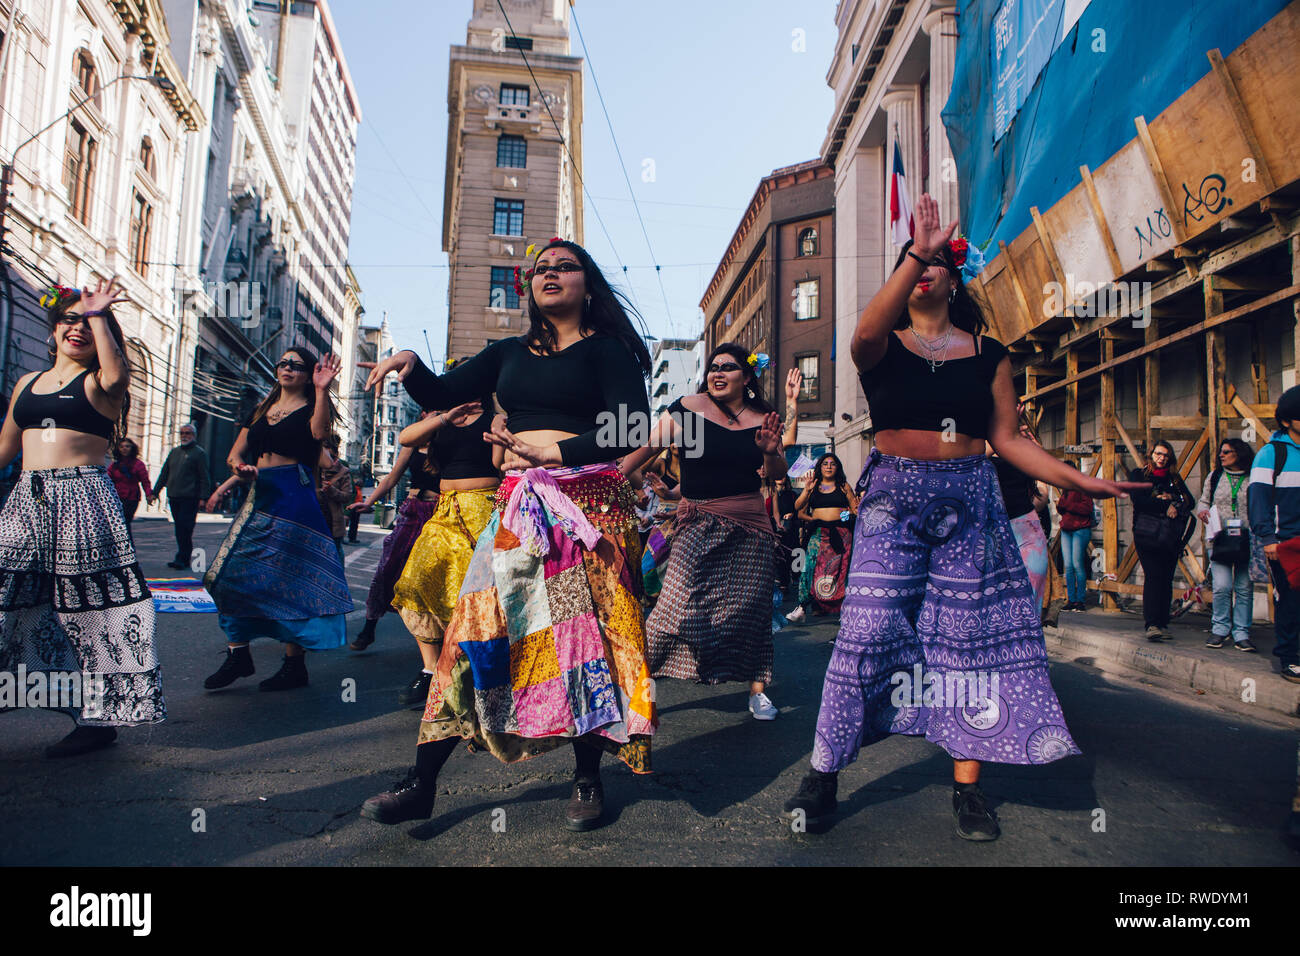 Valparaiso, Chile - June 01, 2018: Chileans marched through Valparaiso's streets, demanding an end to Sexism in the Education System. Stock Photo